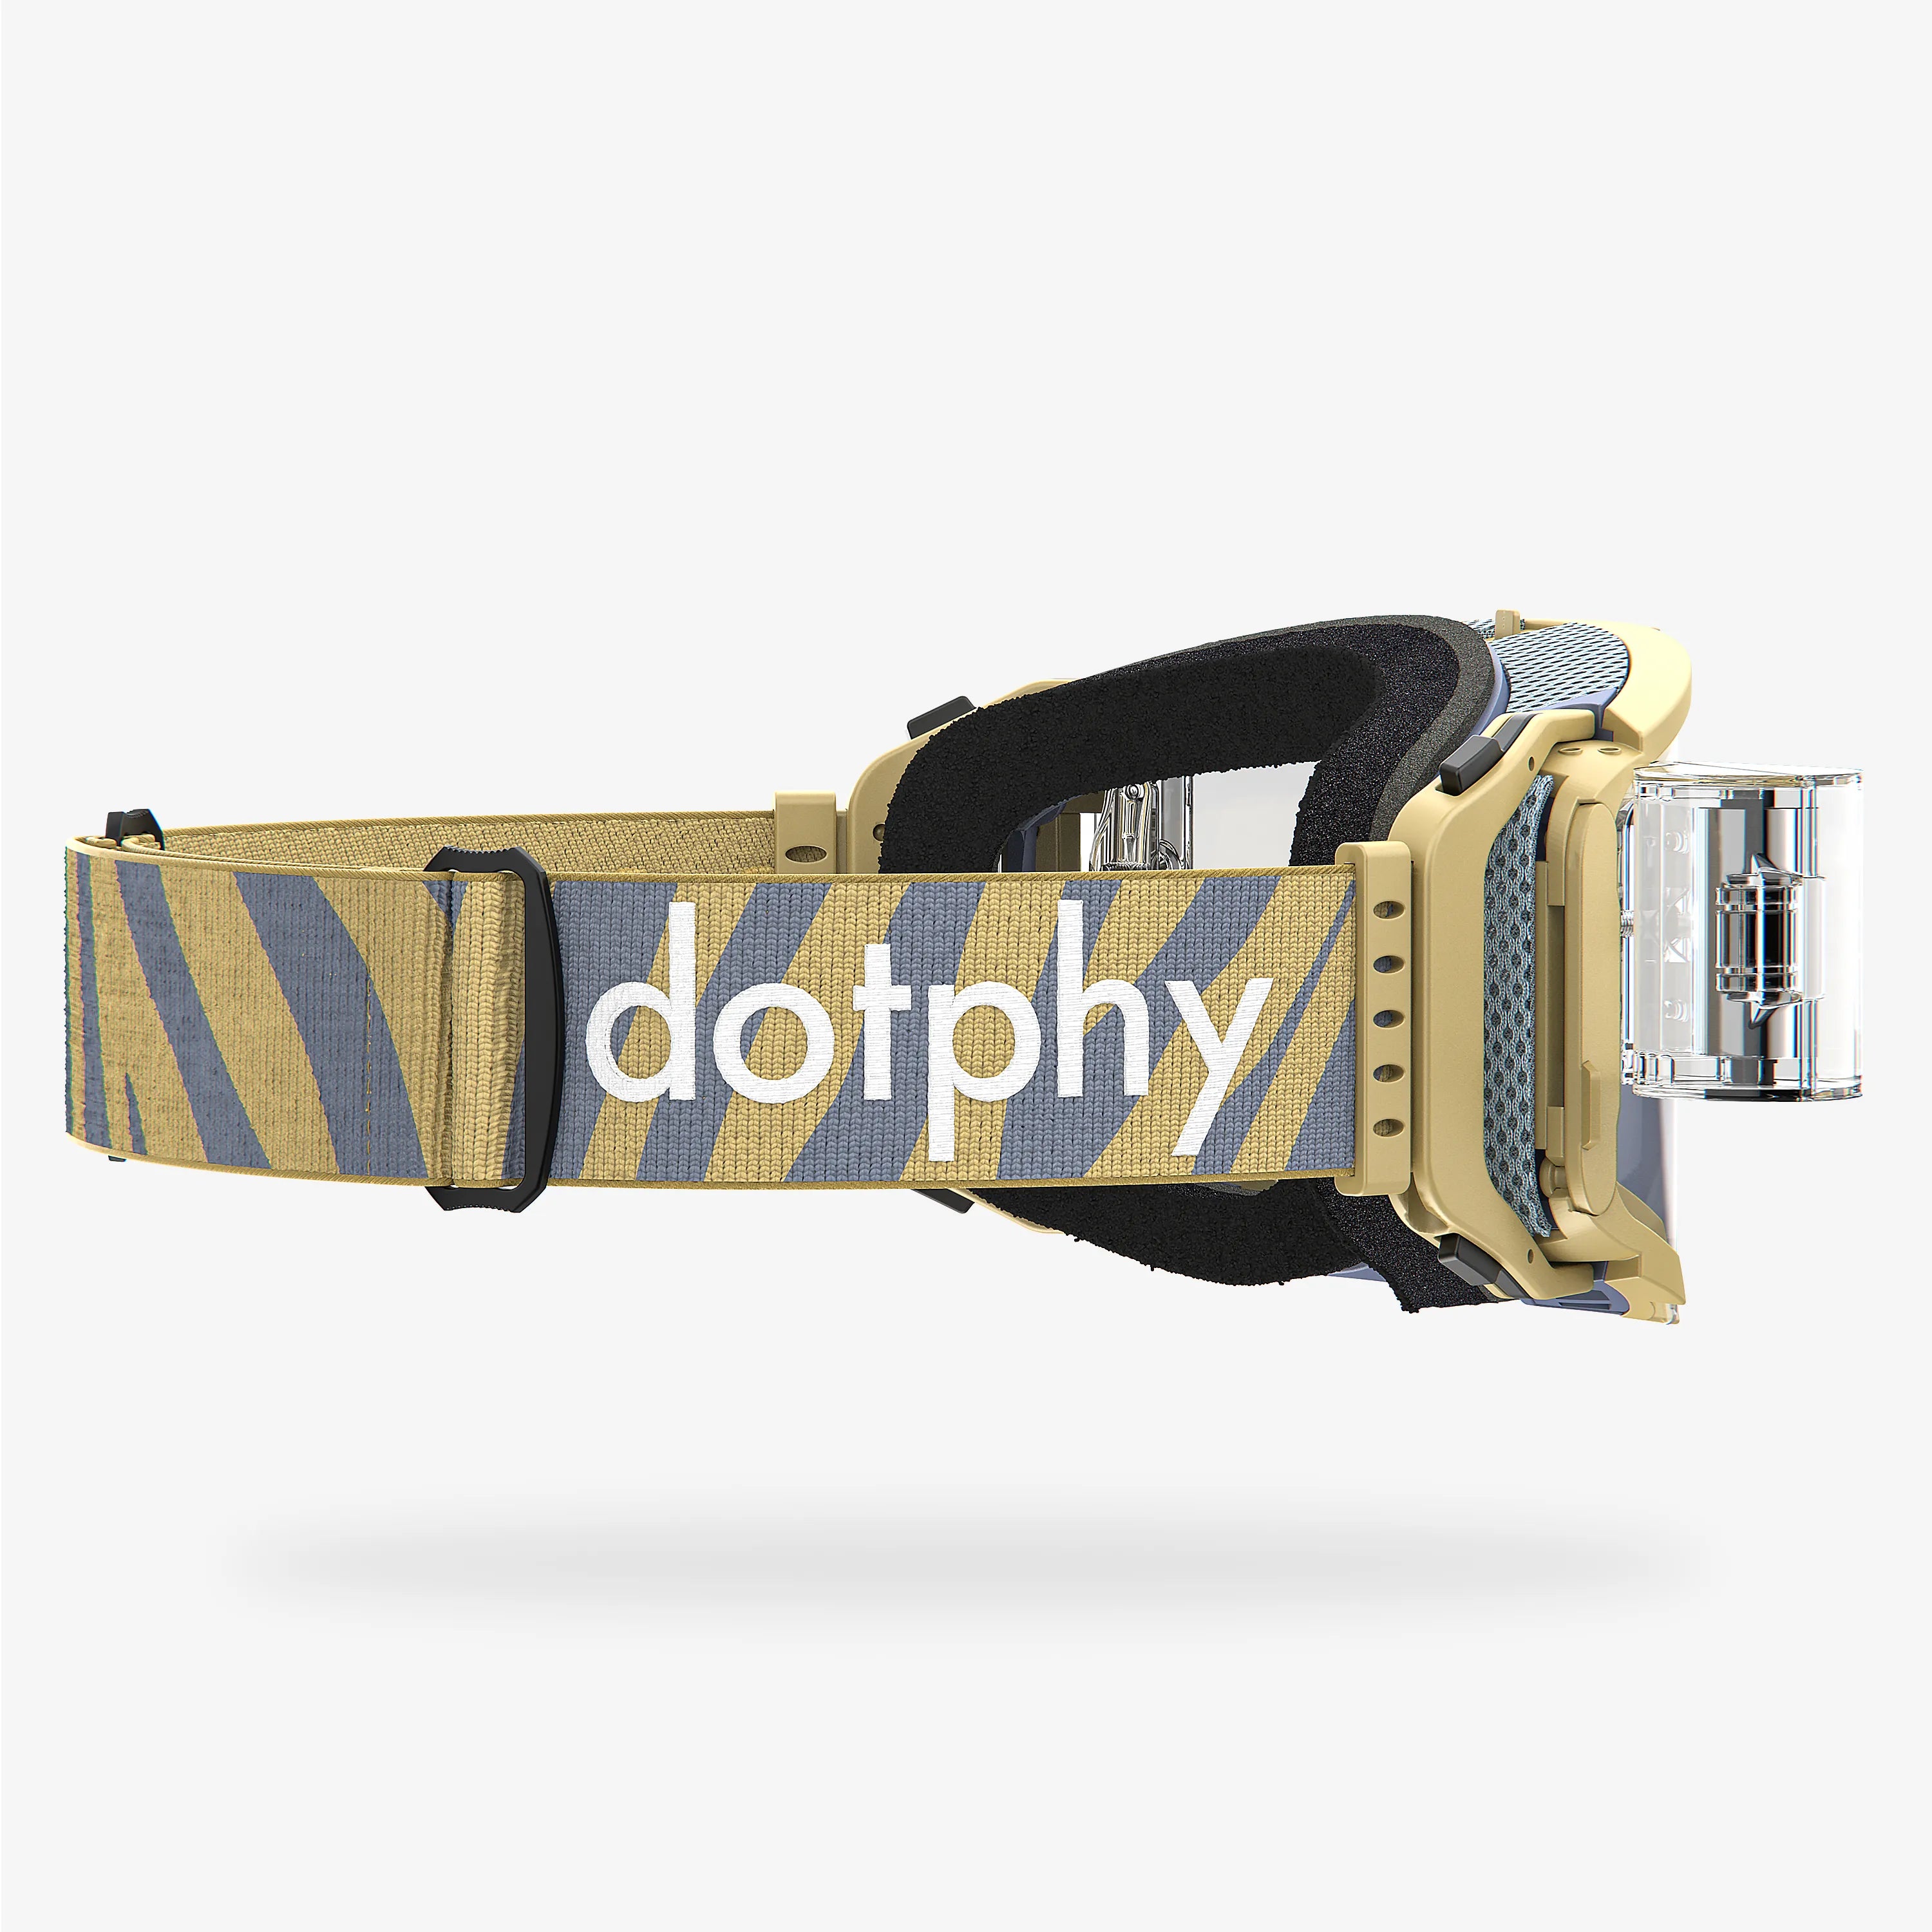 Sporter Boostup Dune All Road Goggle